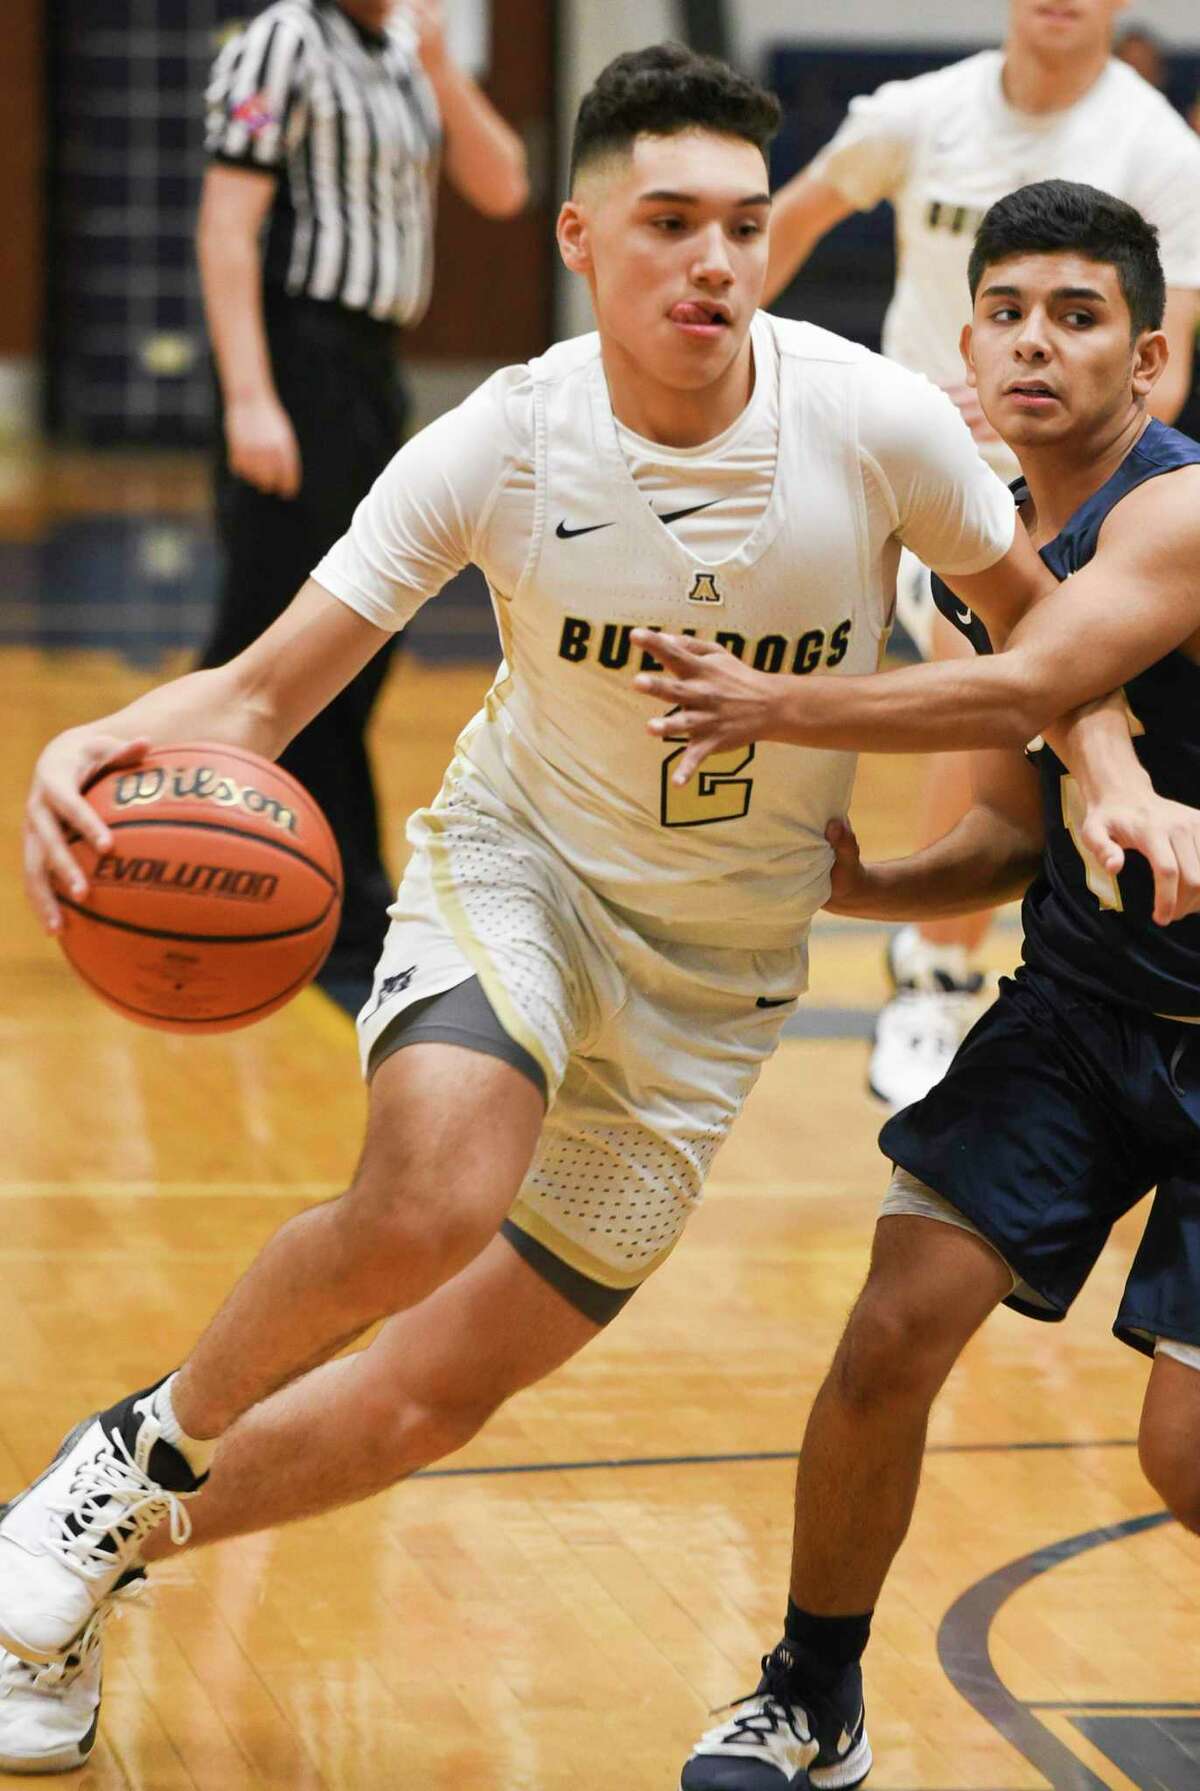 Alexander’s Bobby Torres finished his junior year averaging 15.9 points per game while being named the Offensive Player of the Year in District 29-6A.